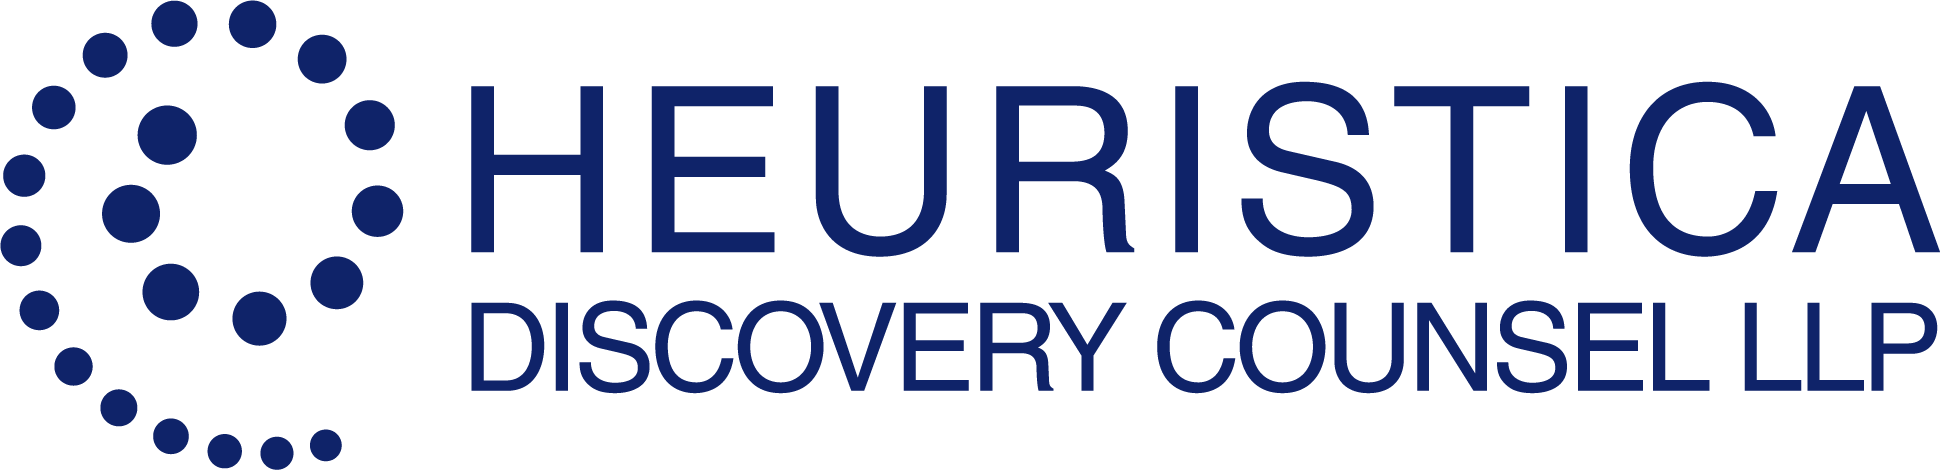 Heuristica Discovery Counsel Logo